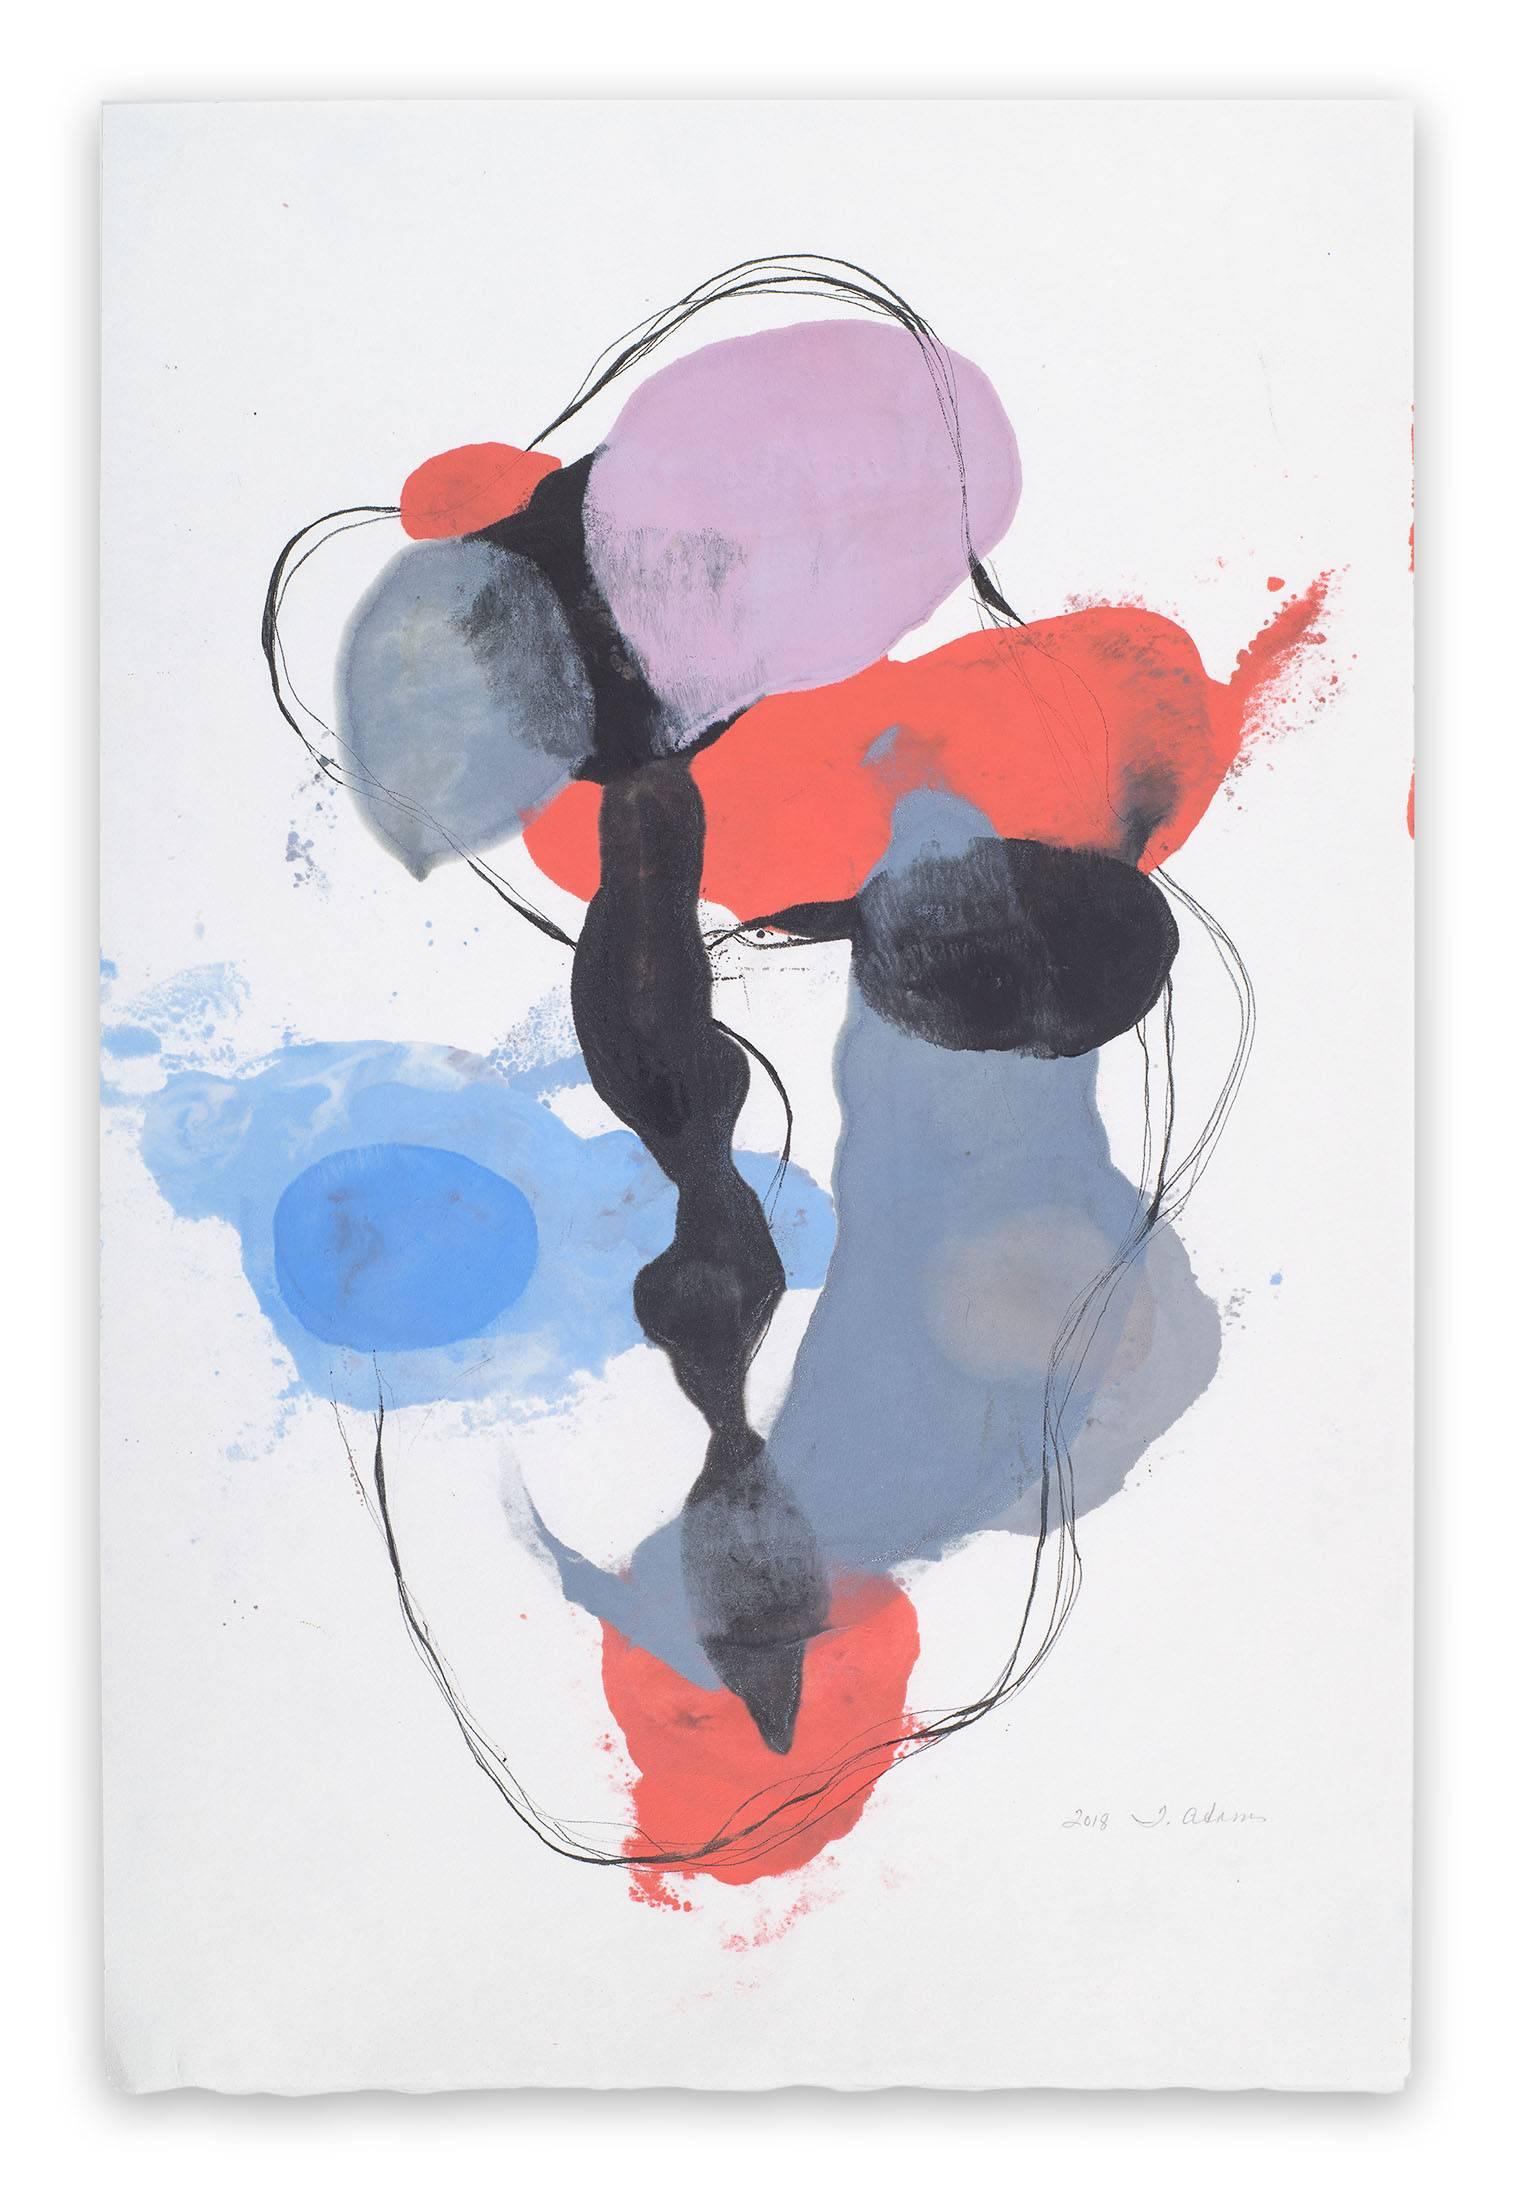 Abstract Painting Tracey Adams - 0218-11 (peinture abstraite)